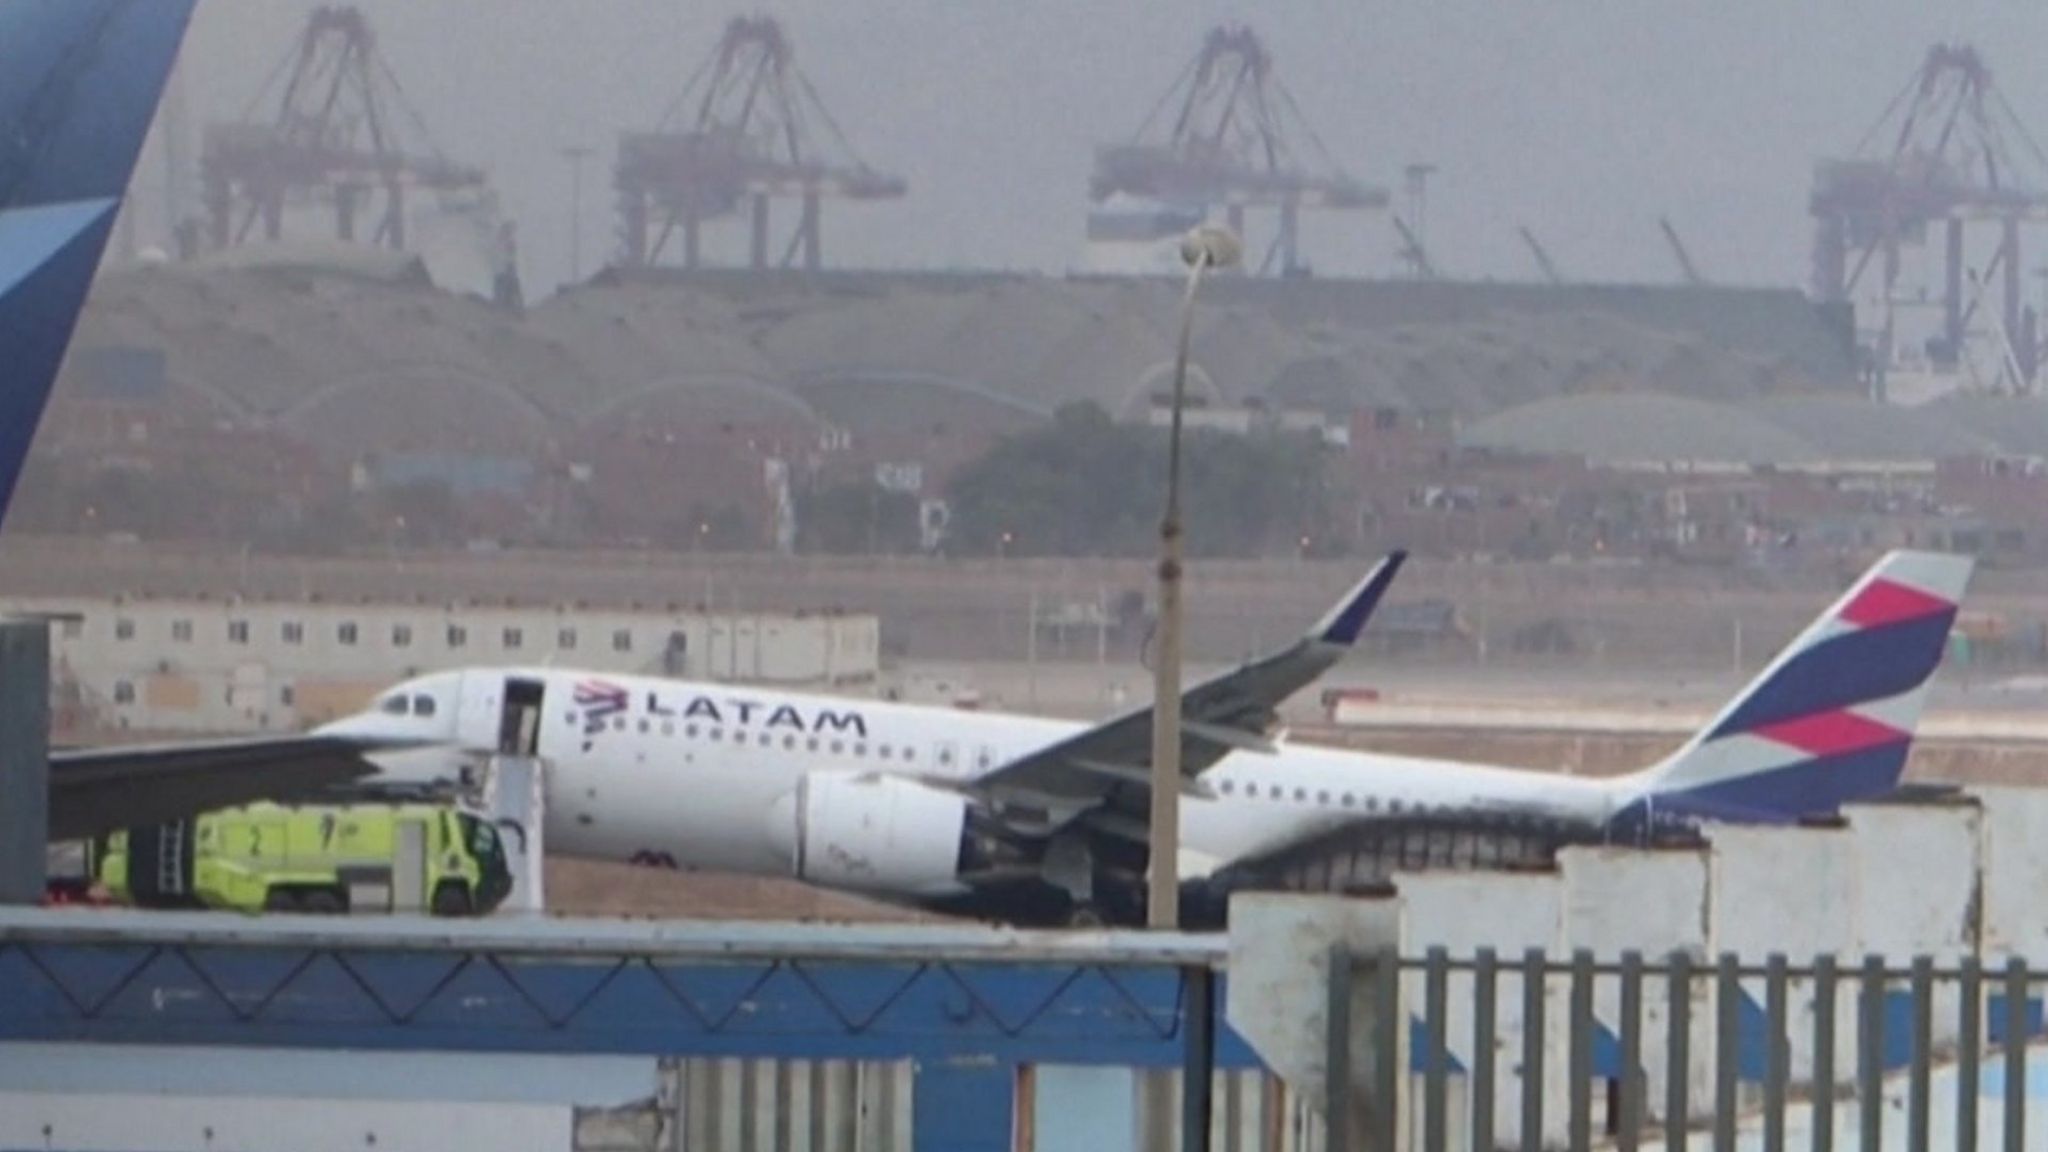 LA2213 crashed on tarmac at Jorge Chavez Airport in Lima